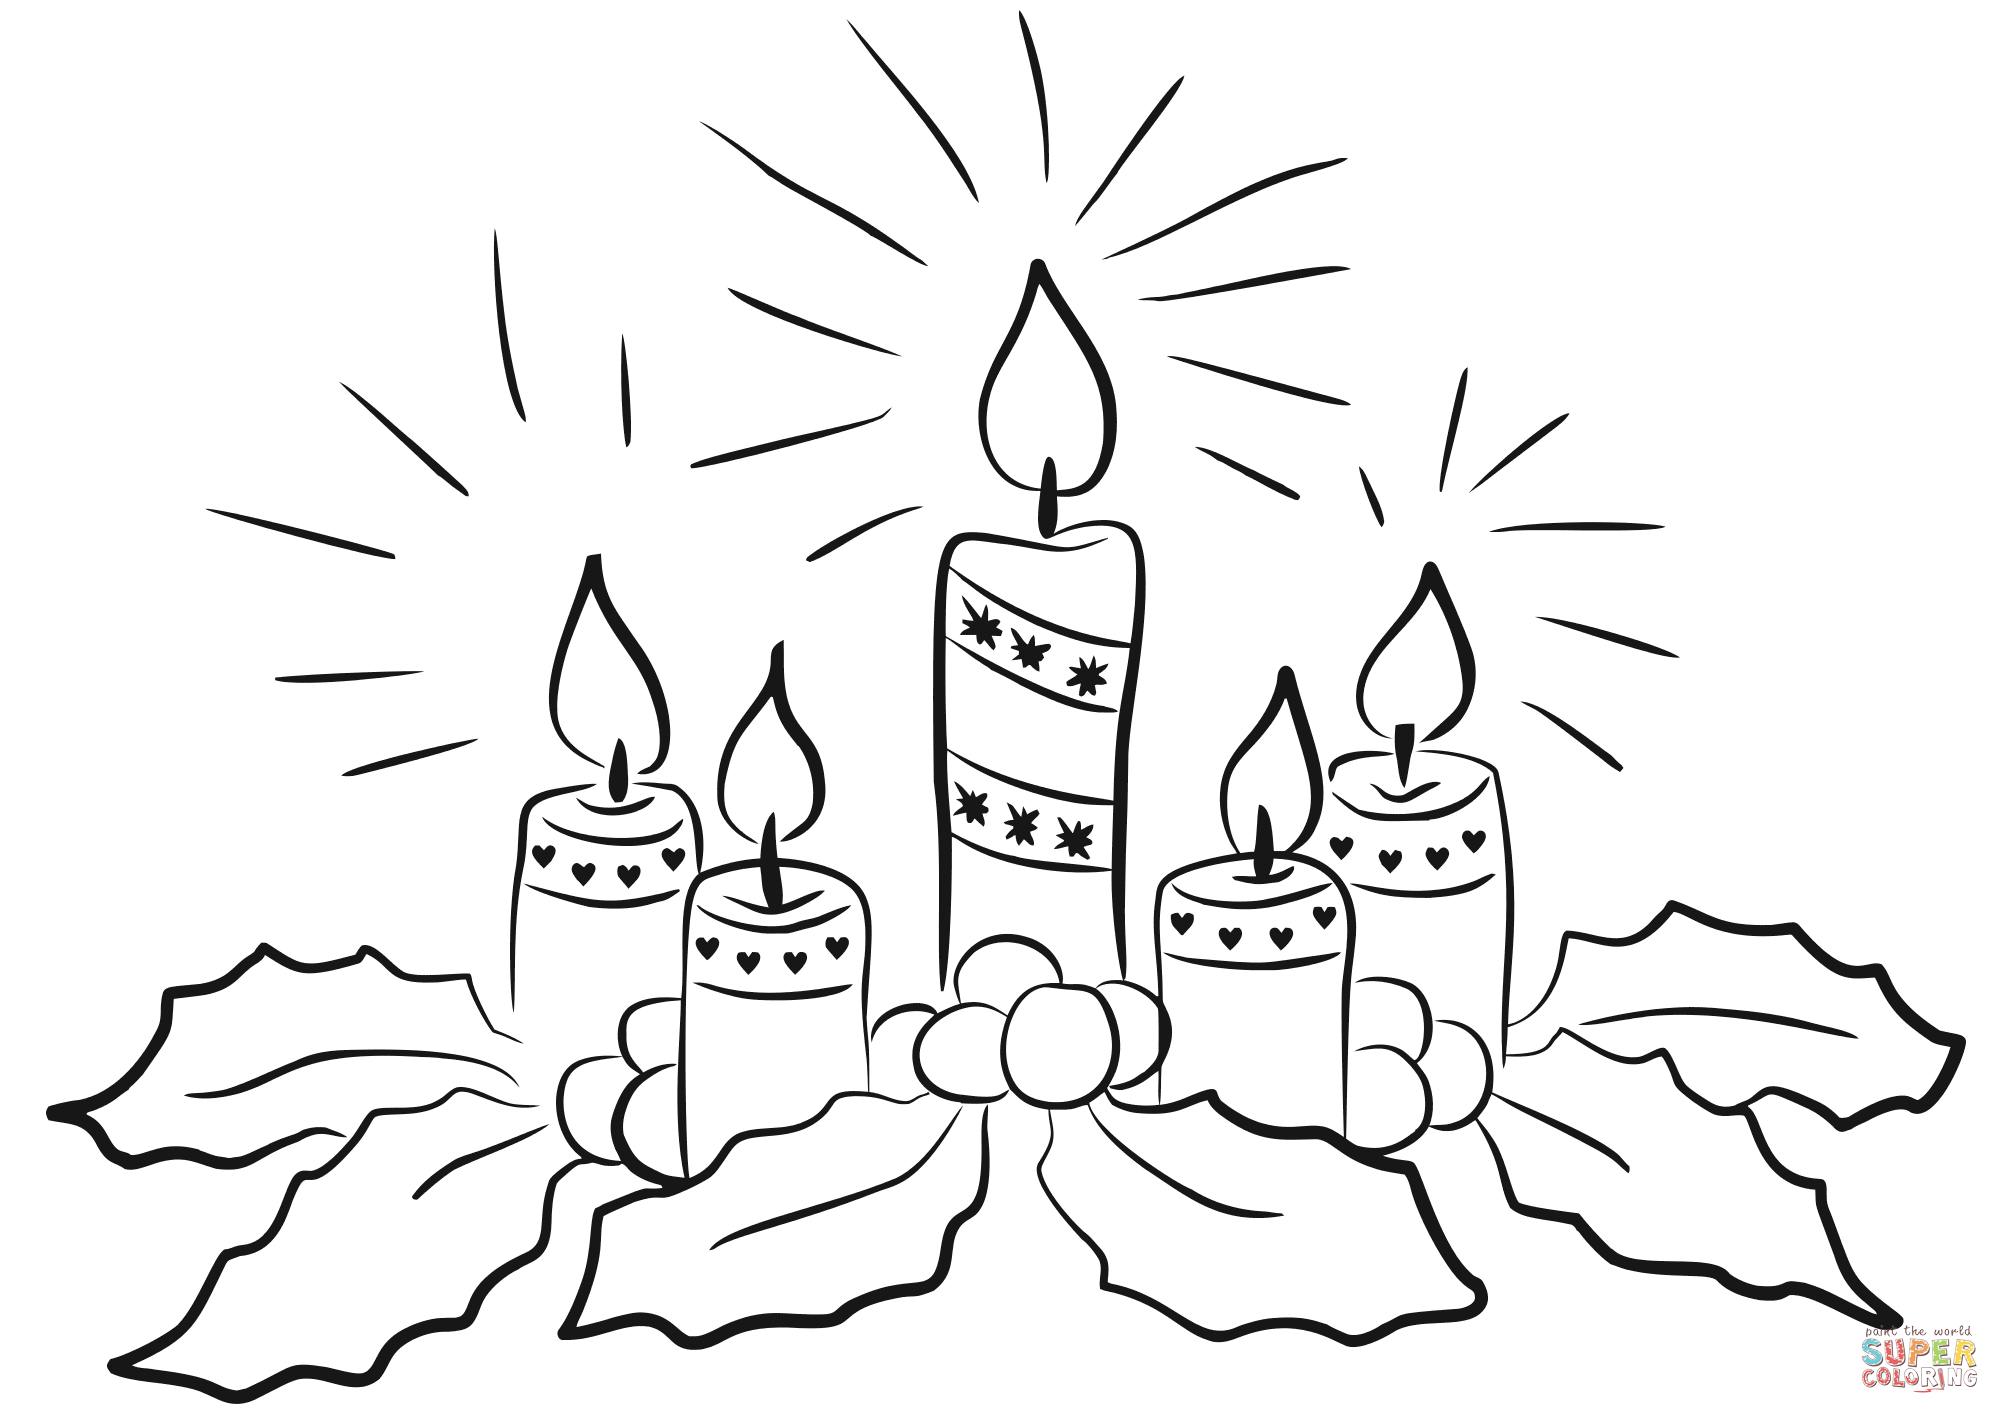 Advent candles coloring page free printable coloring pages